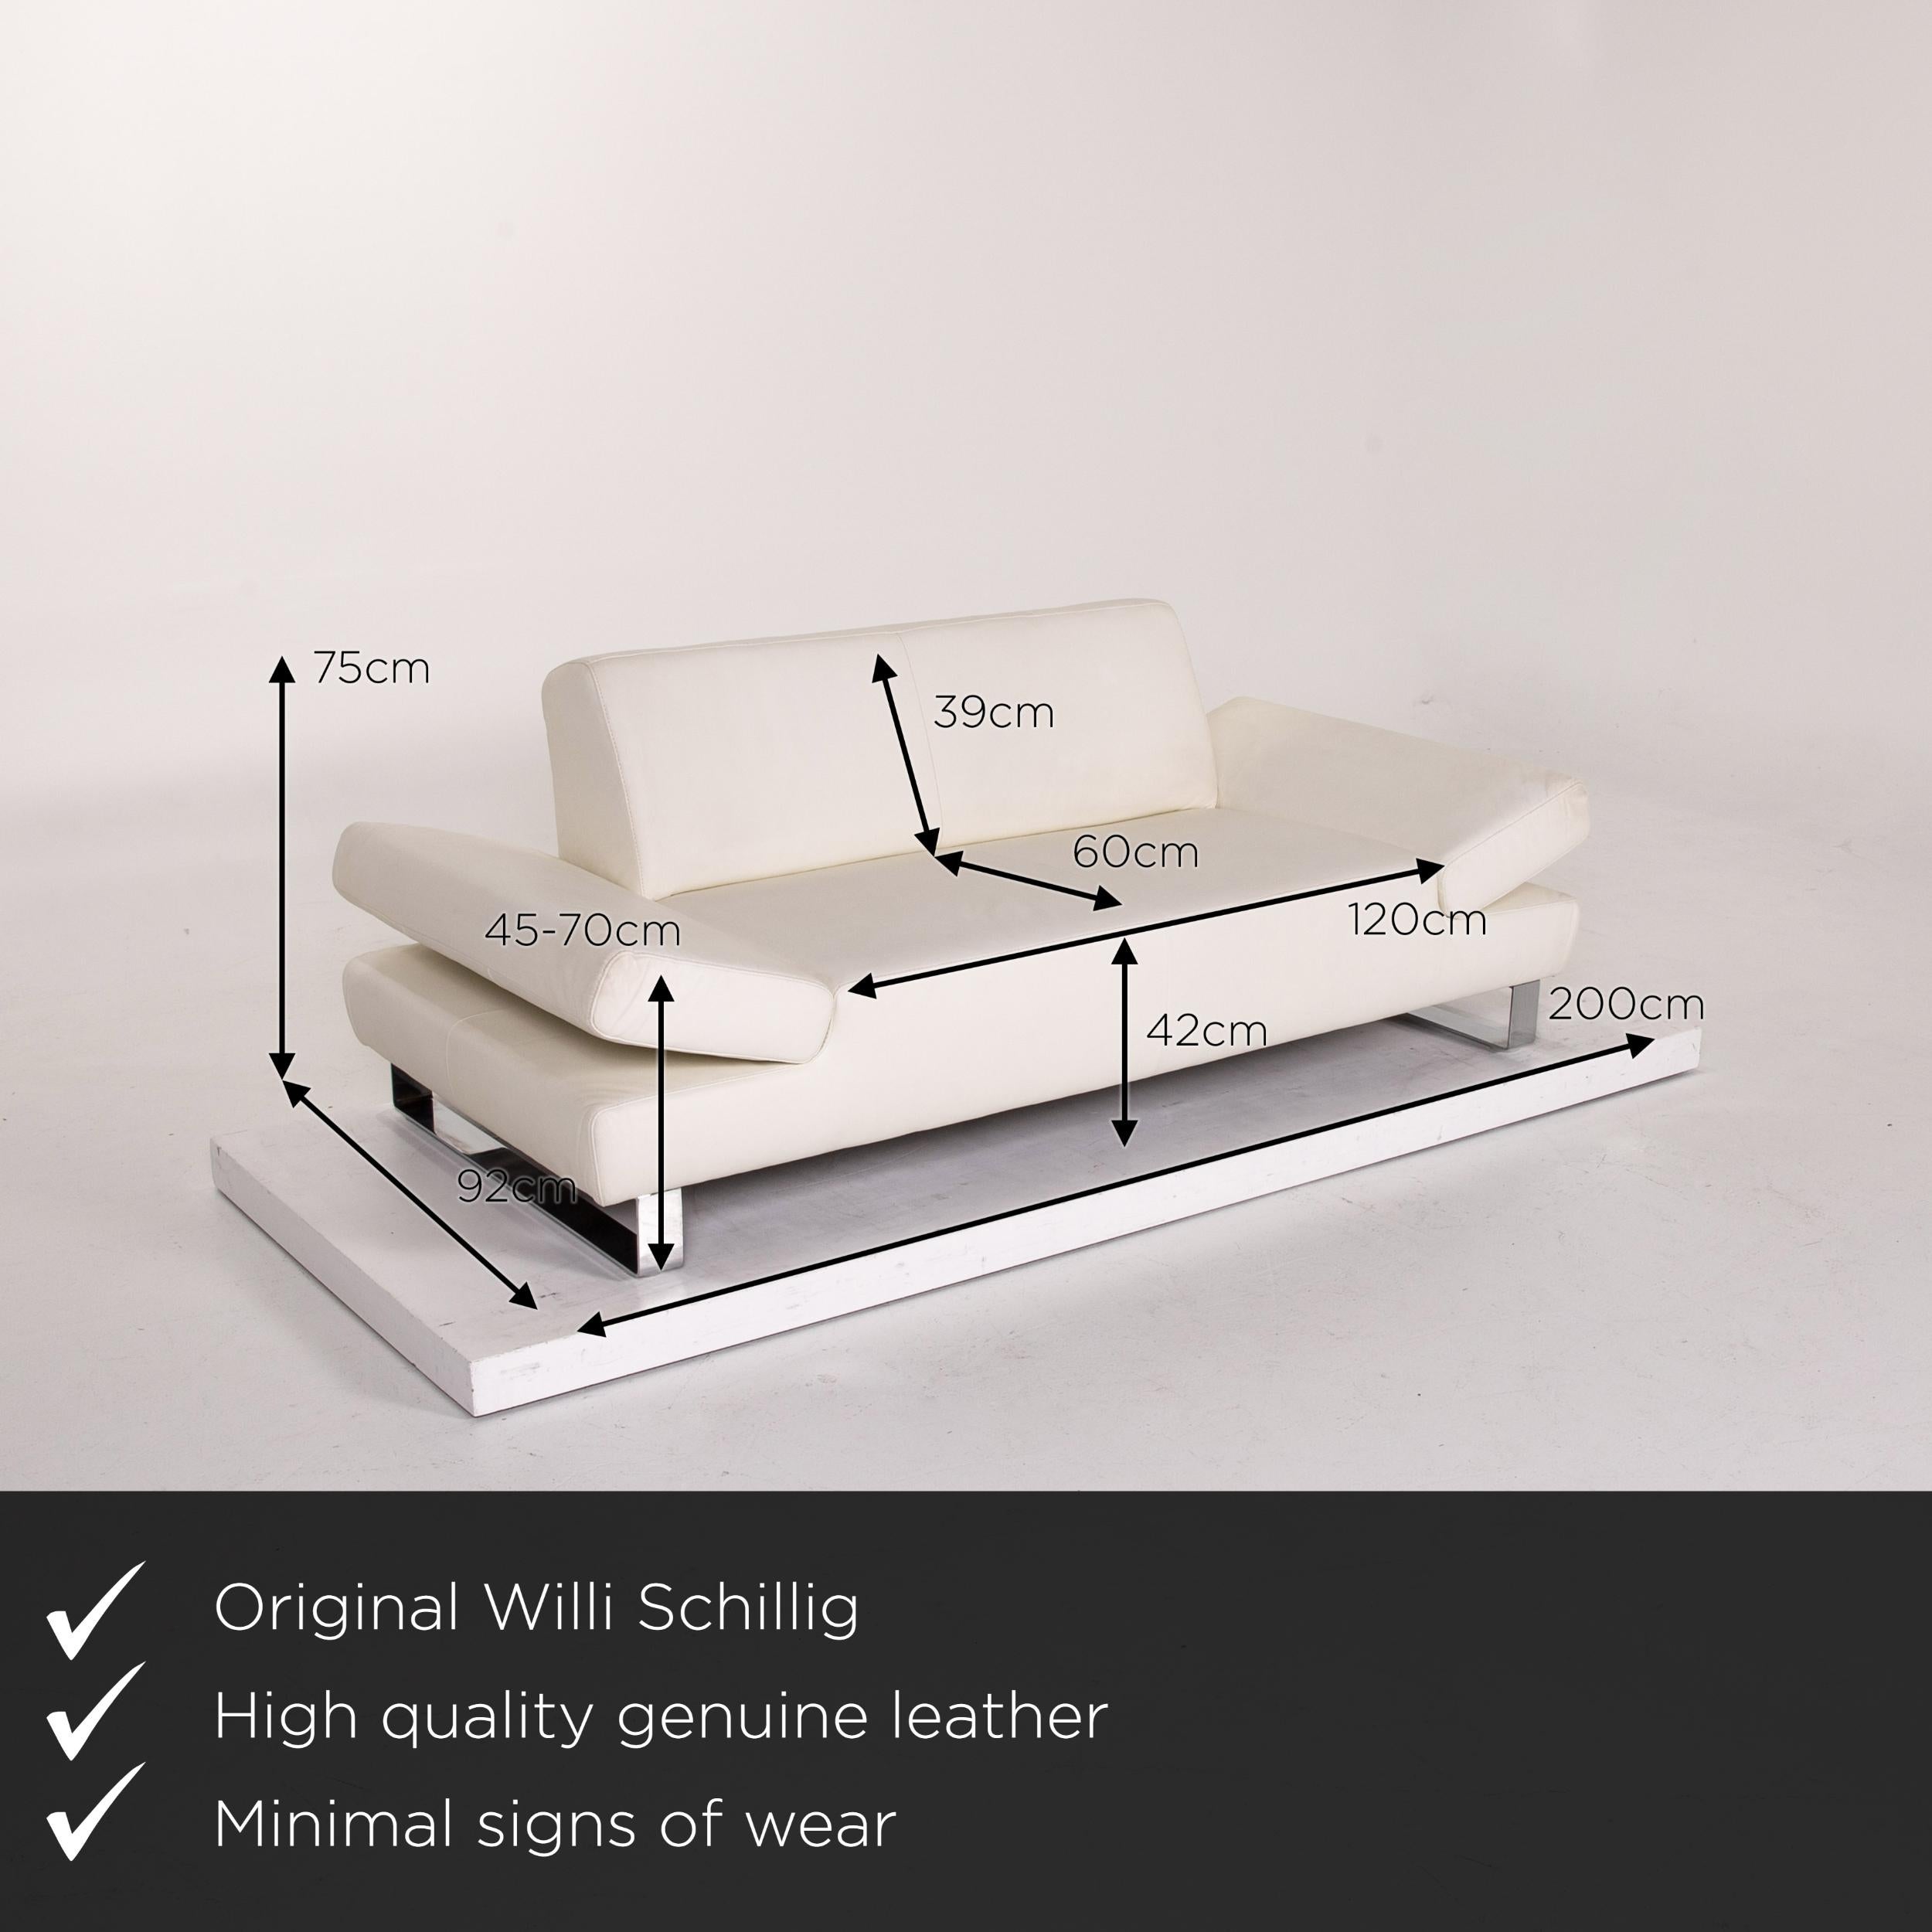 We present to you a Willi Schillig leather sofa white two-seat function couch.


 Product measurements in centimeters:
 

Depth 92
Width 200
Height 75
Seat height 42
Rest height 45
Seat depth 60
Seat width 120
Back height 39.
 